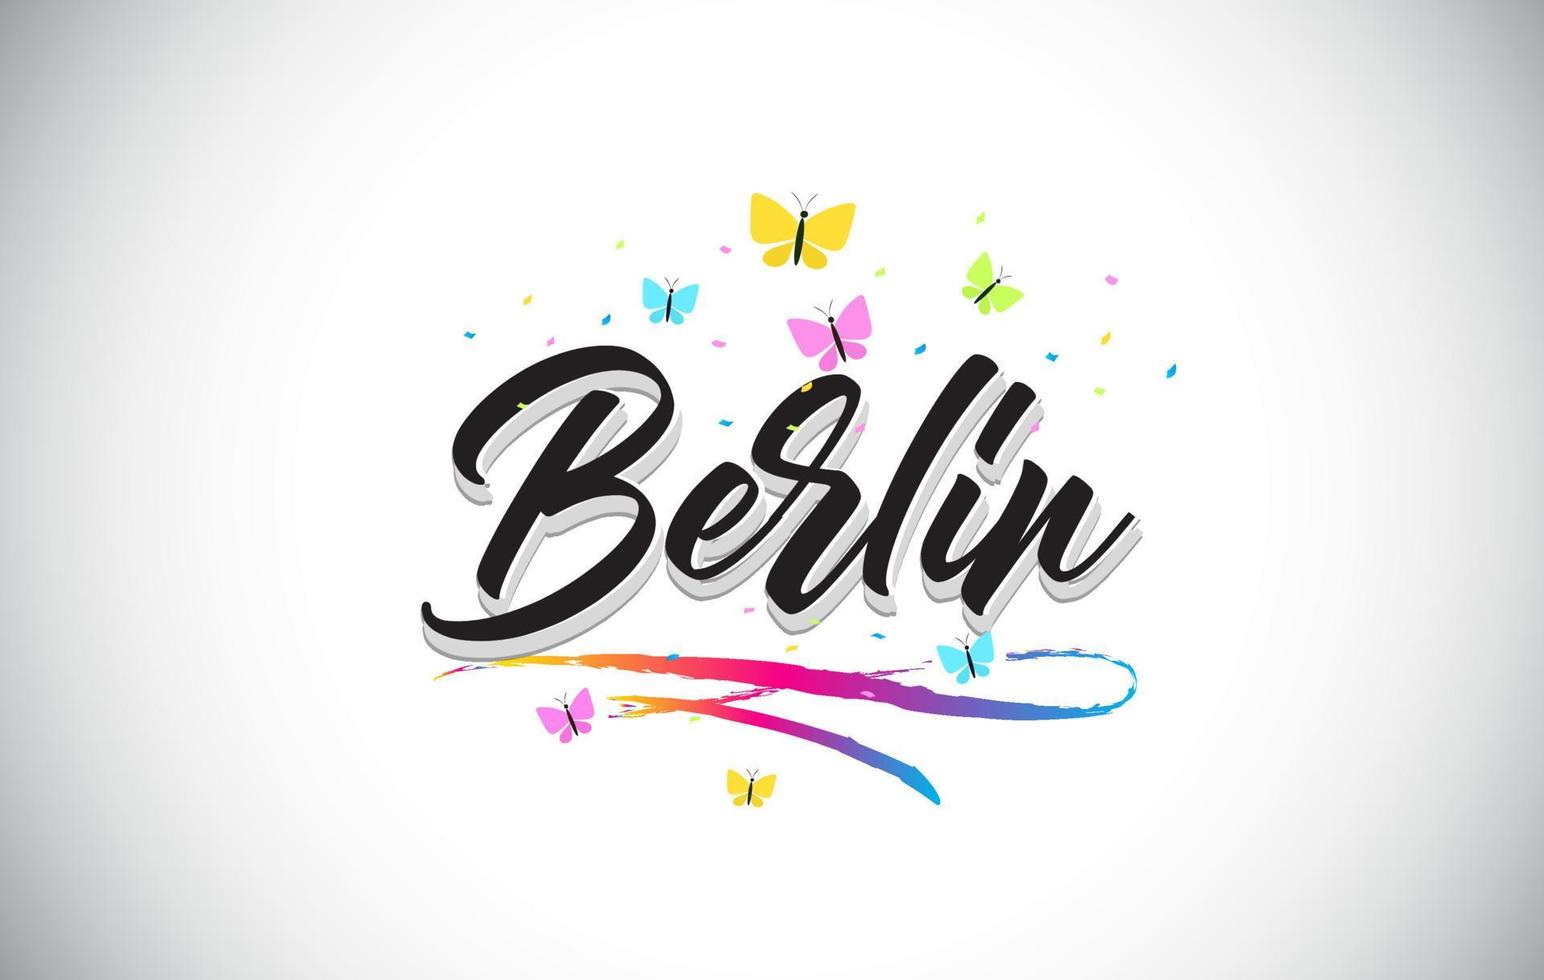 Berlin Handwritten Vector Word Text with Butterflies and Colorful Swoosh.